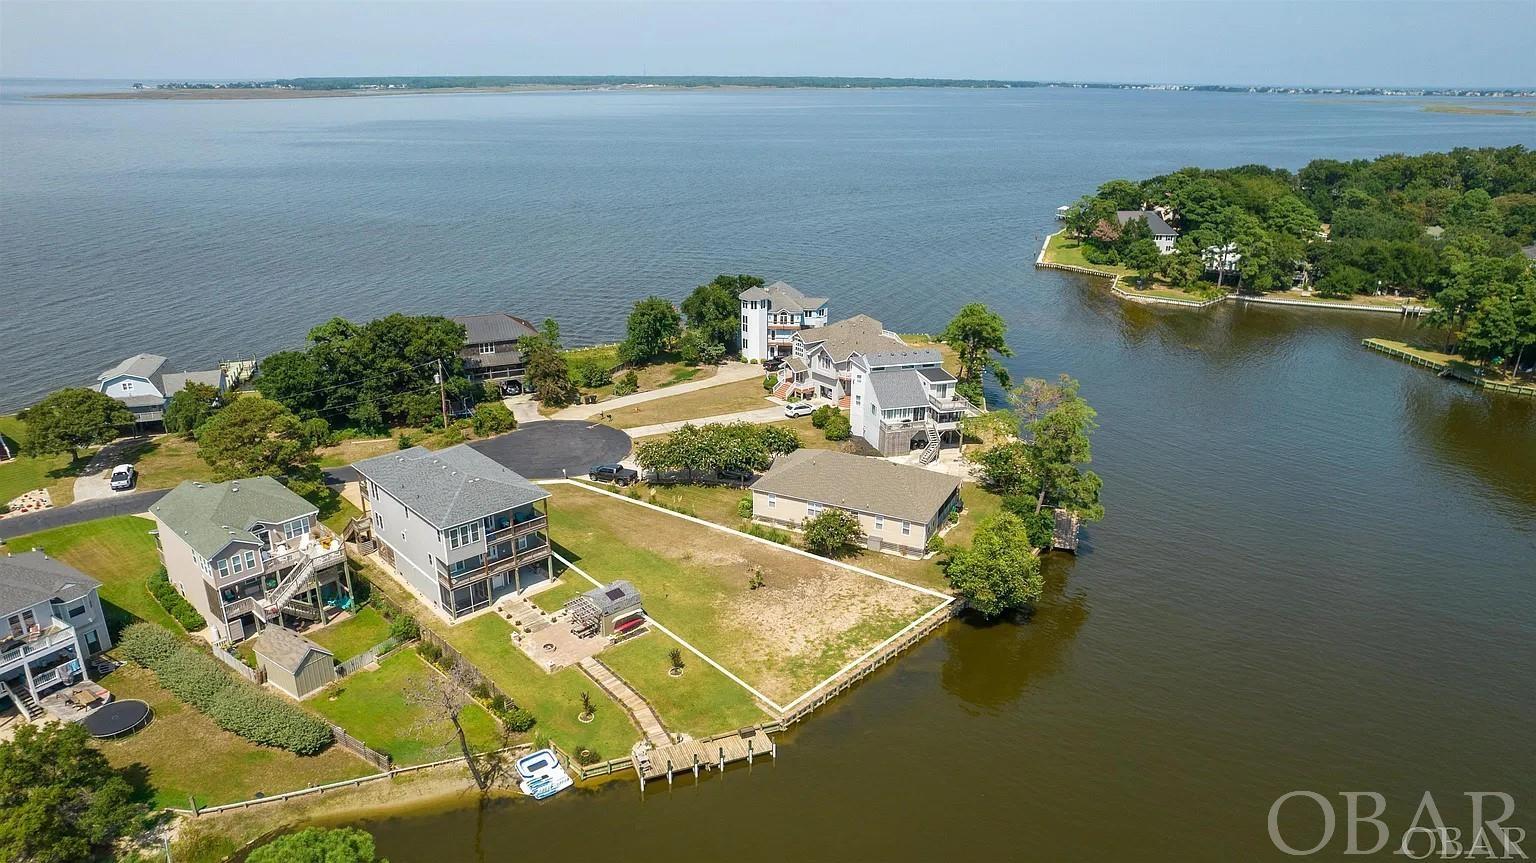 Beautiful Waterfront Lot with a Lake sized Canal, that opens up to Eagleton Point, and then into the Albemarle Sound! With over 80ft. of New Bulkhead installed in 2021, this property's proximity to the sound offers various water based activities, such as sailing, fishing, boating, kayaking and paddleboarding, making it an ideal location for outdoor enthusiasts and water lovers! Clipper Court is a private Cul-de-sac within a short walk or bike ride to Colington Harbour Soundside park. Which includes a sound front beach, picnic area, boardwalk, boat ramp and playground. You have the option to join the Colington Harbour Yacht & Raquet Club to enjoy the Olympic sized Sound Front pool, Tennis Courts and Clubhouse. Explore the possibilities of building your dream home, with it's cleared and open space, protective bulkhead, and spectacular Sunsets, this property invites you to create a remarkable living space that seamlessly blends with the natural beauty of the surrounding water.